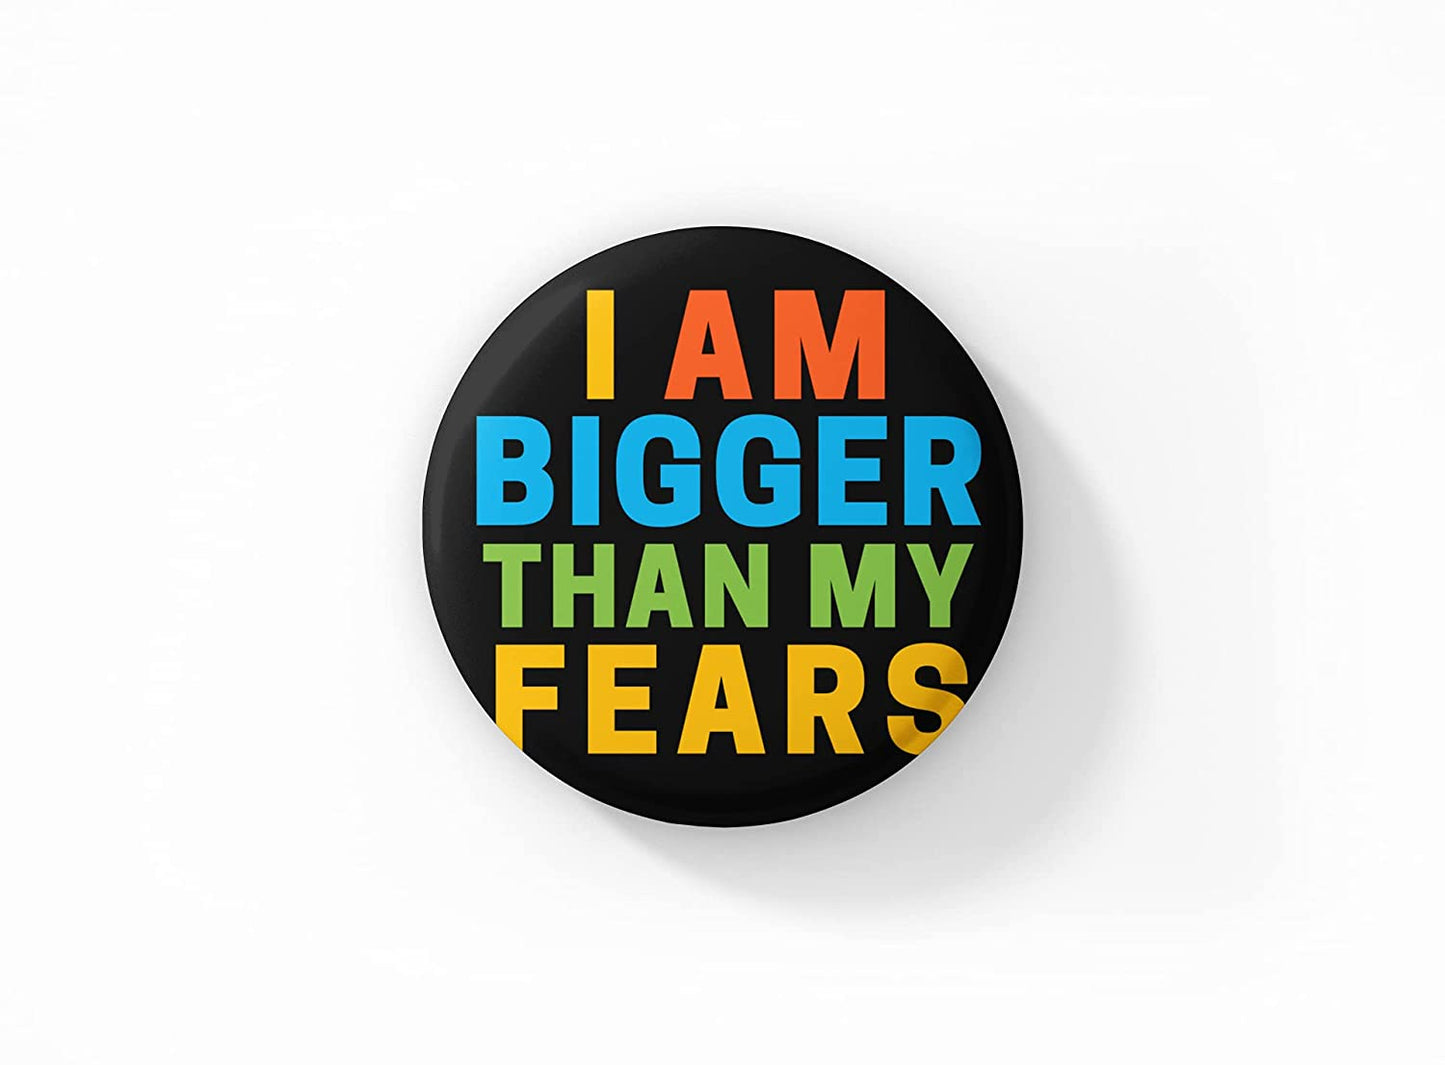 I M Bigger Than My Fears Pin Button Badge Black Pack of 1